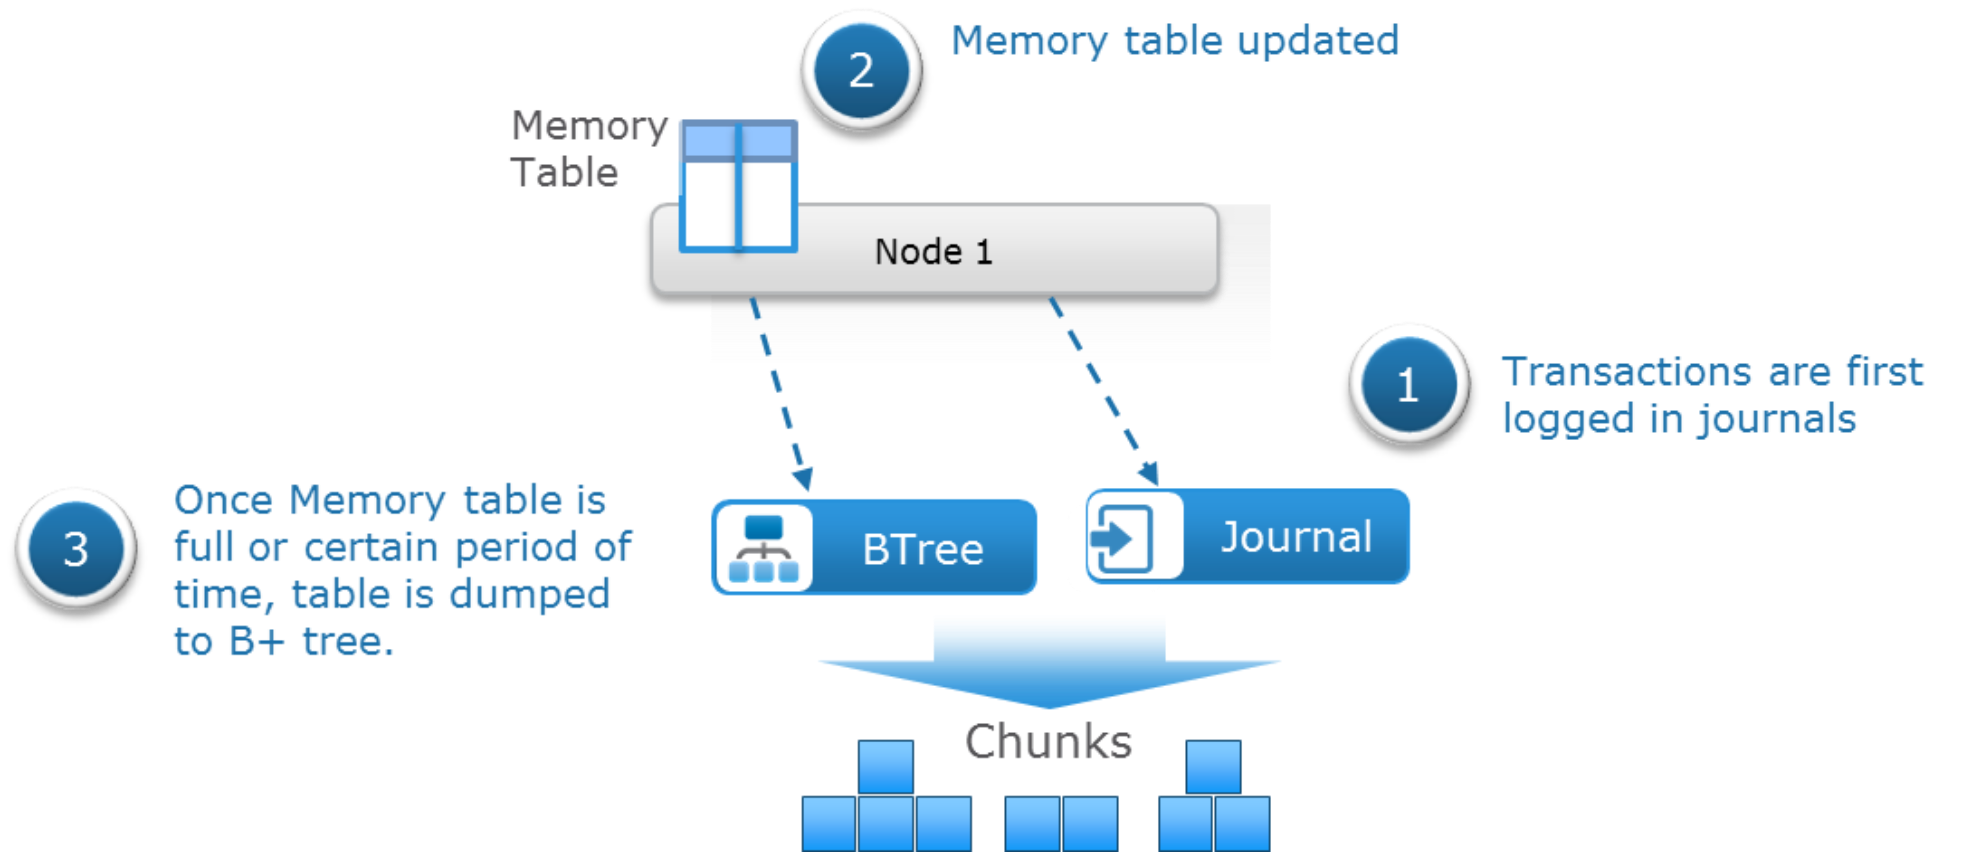 Transactions are first written to journal chunks. Memory table is updated with transactions. Memory table is merge sorted to B tree chunks when full or as system requires. 